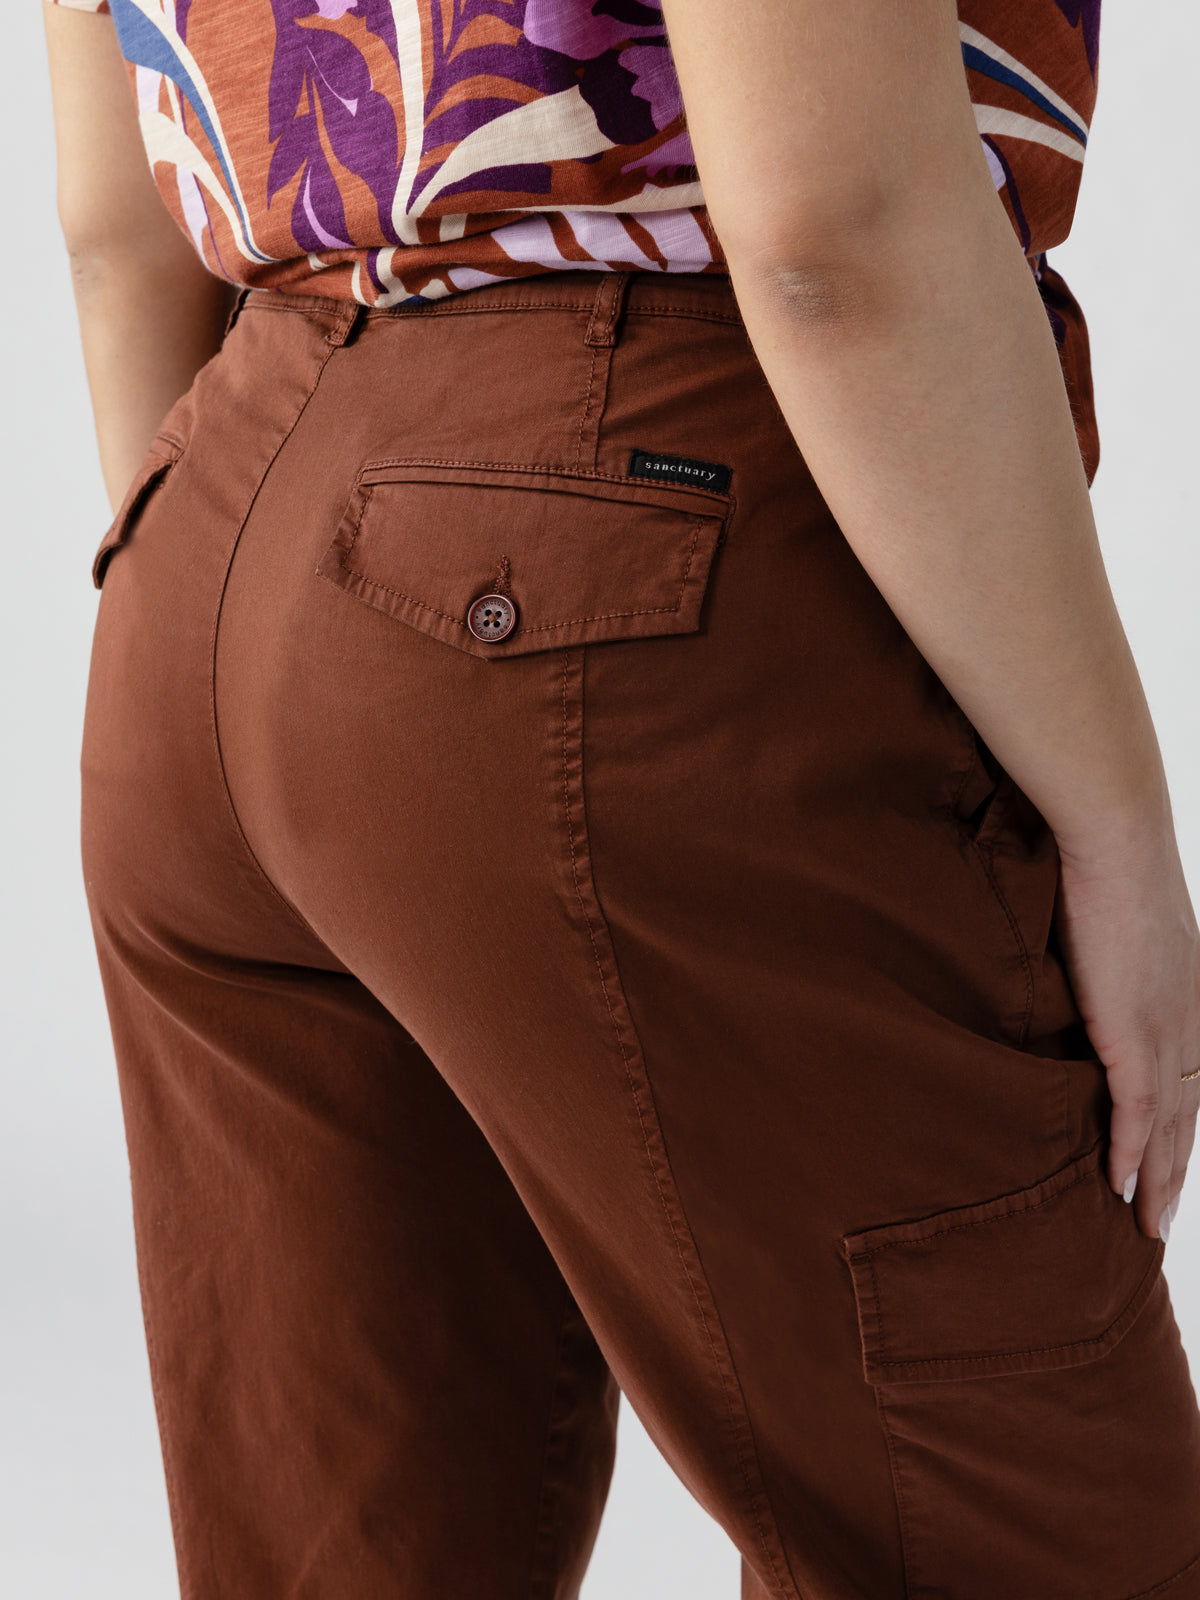 Rebel Standard Rise Pant Rich Clay Inclusive Collection